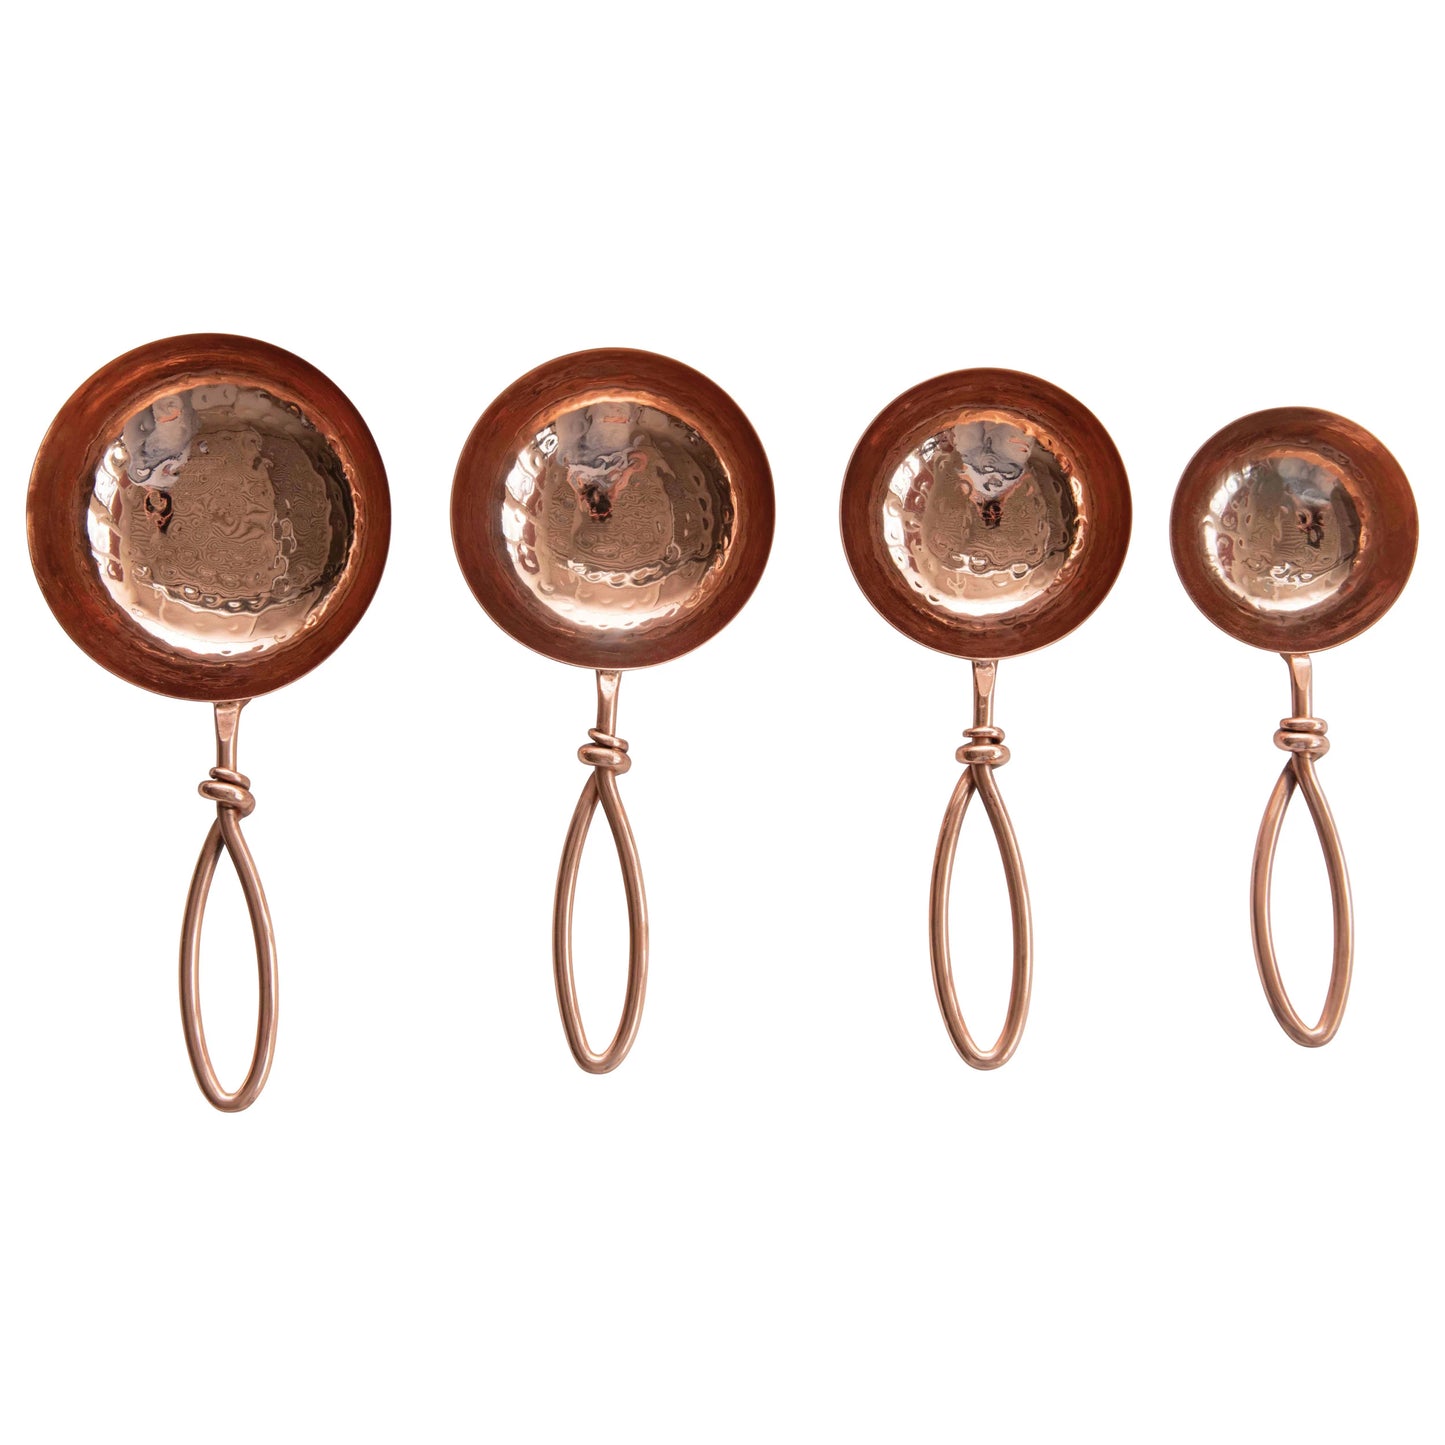 Hammered Copper Scoops